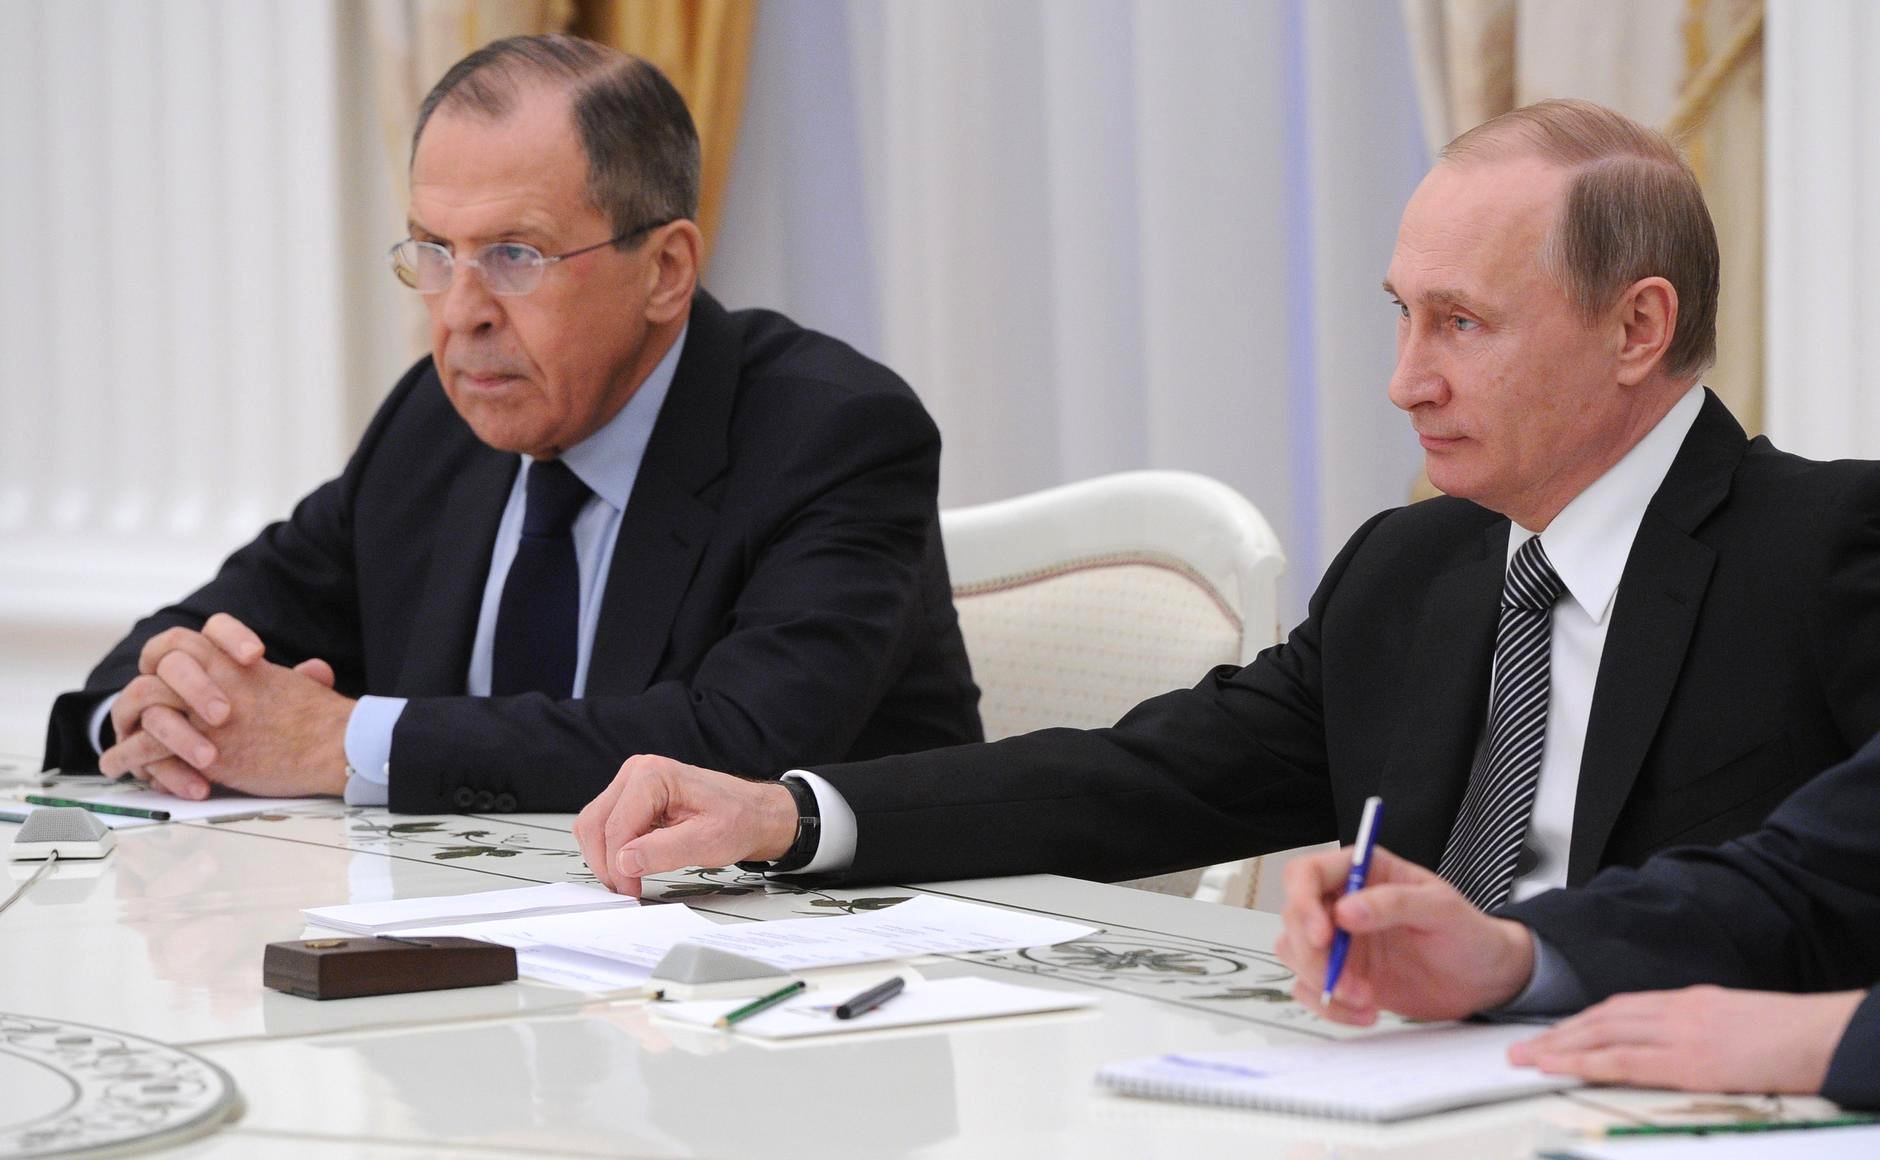 Russian Foreign Minister Sergey Lavrov (left) and President Vladimir Putin in a 2015 meeting with Iranian officials in Moscow.